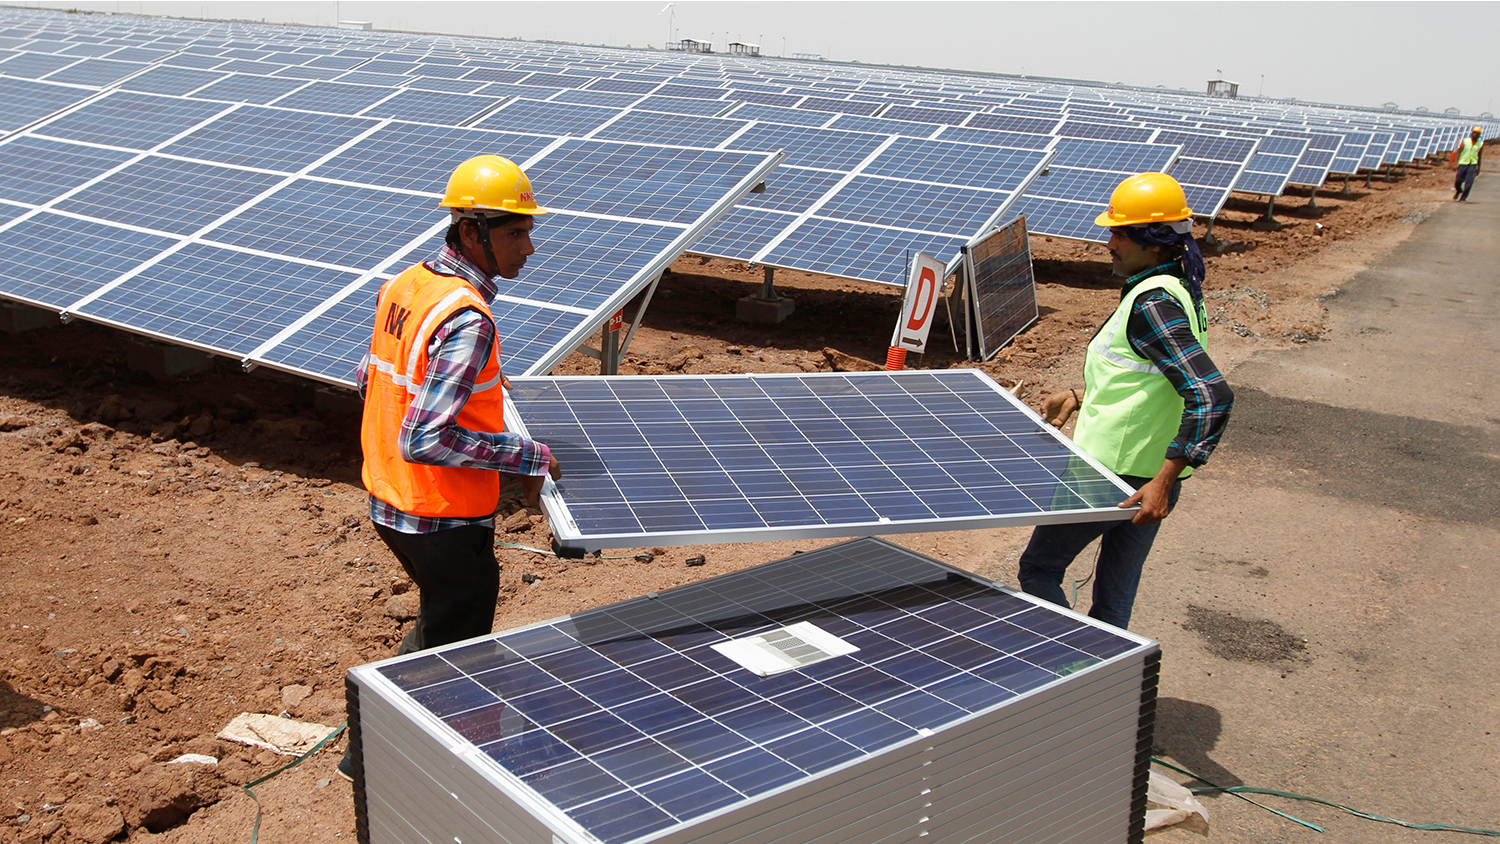 Workers carry photovoltaic solar panels